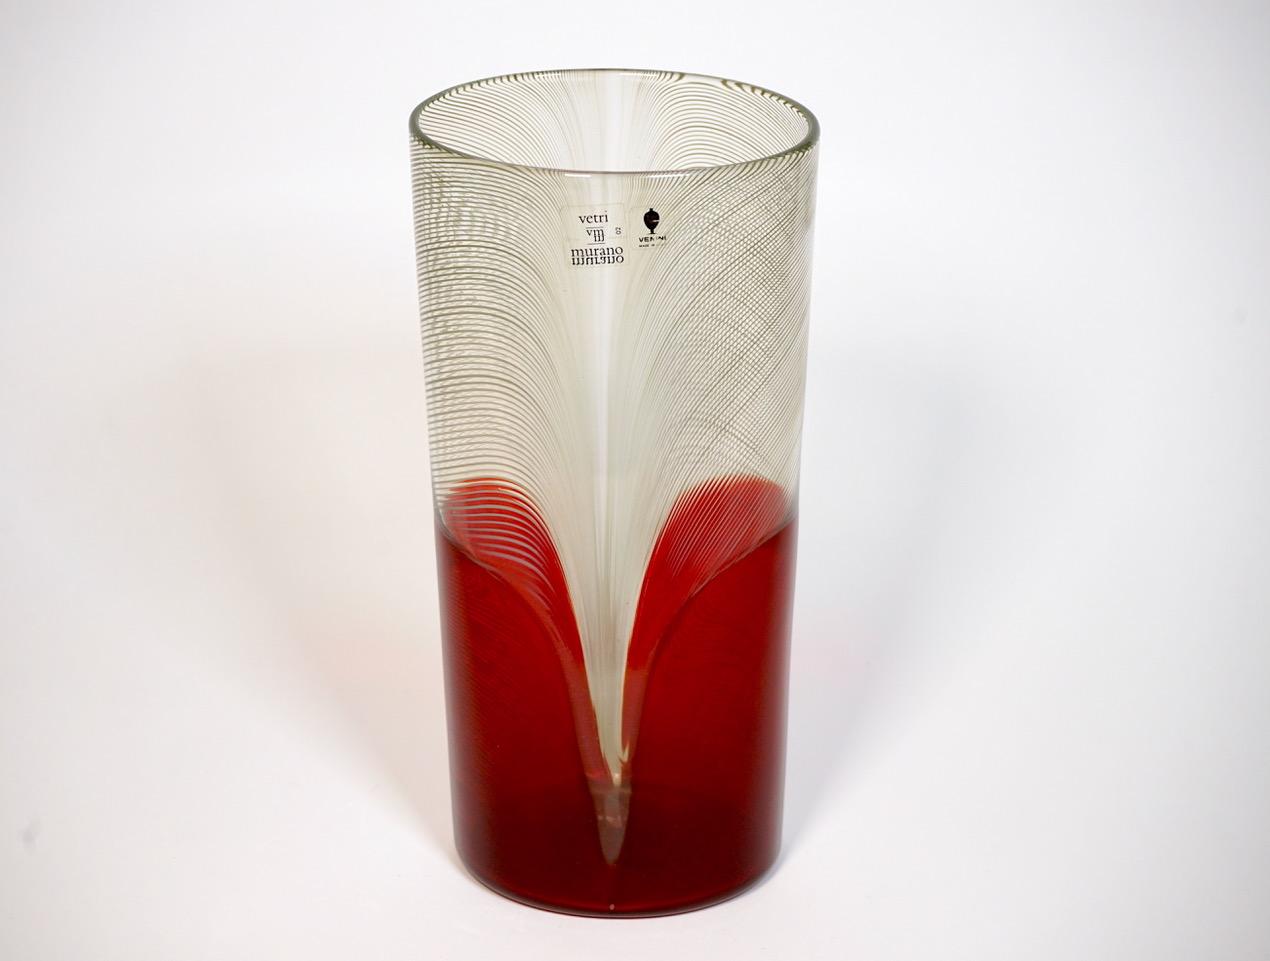 Murano glass vase of the series Pavoni designed by Tapio Wirkkala for Venini in 1982. Signed and dated. With original label.

Biography
Tapio Wirkkala was born on 2 June 1915 in the southern Finnish port city of Hanko. He went to school in